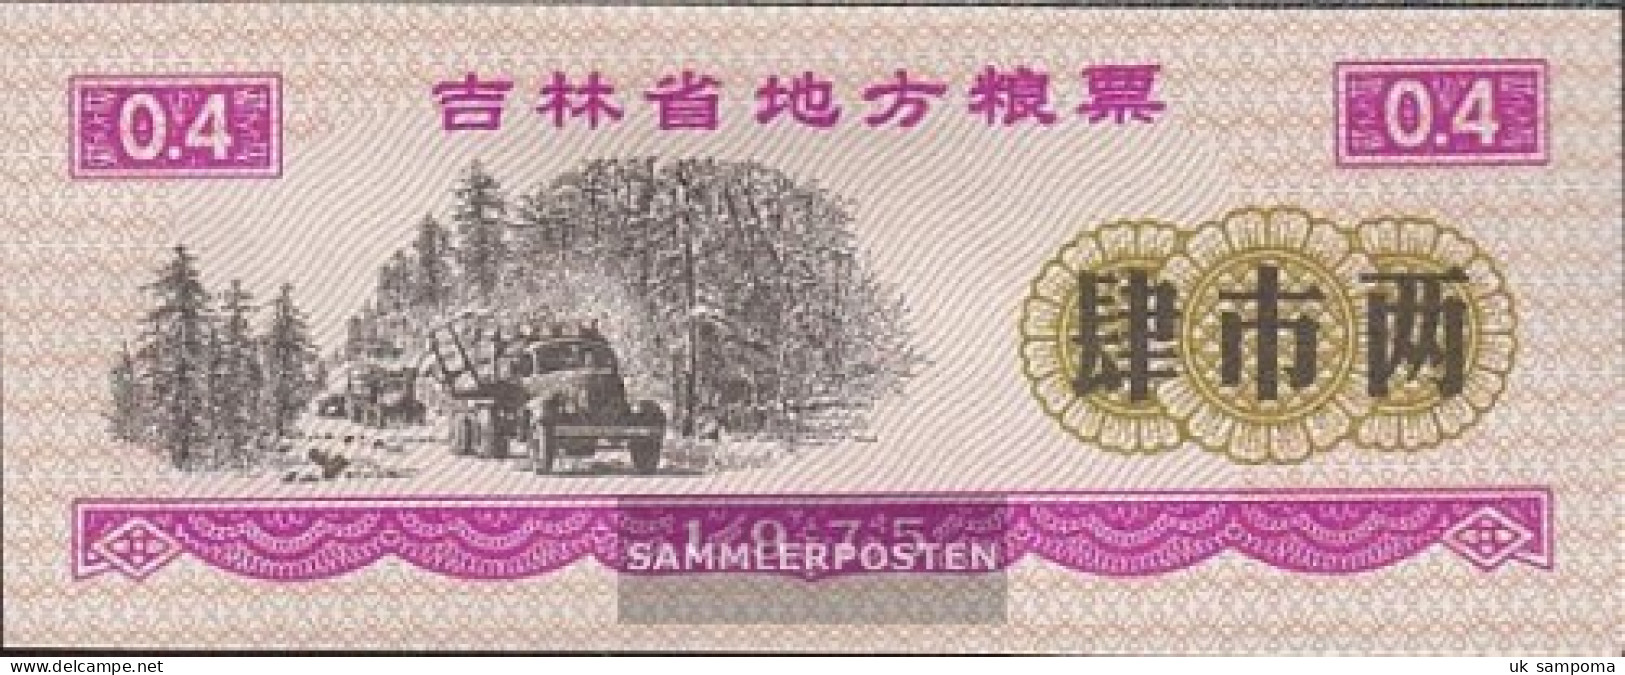 People's Republic Of China Chinese Reisgutschein Uncirculated 1975 0,4 Jin Forestry - China